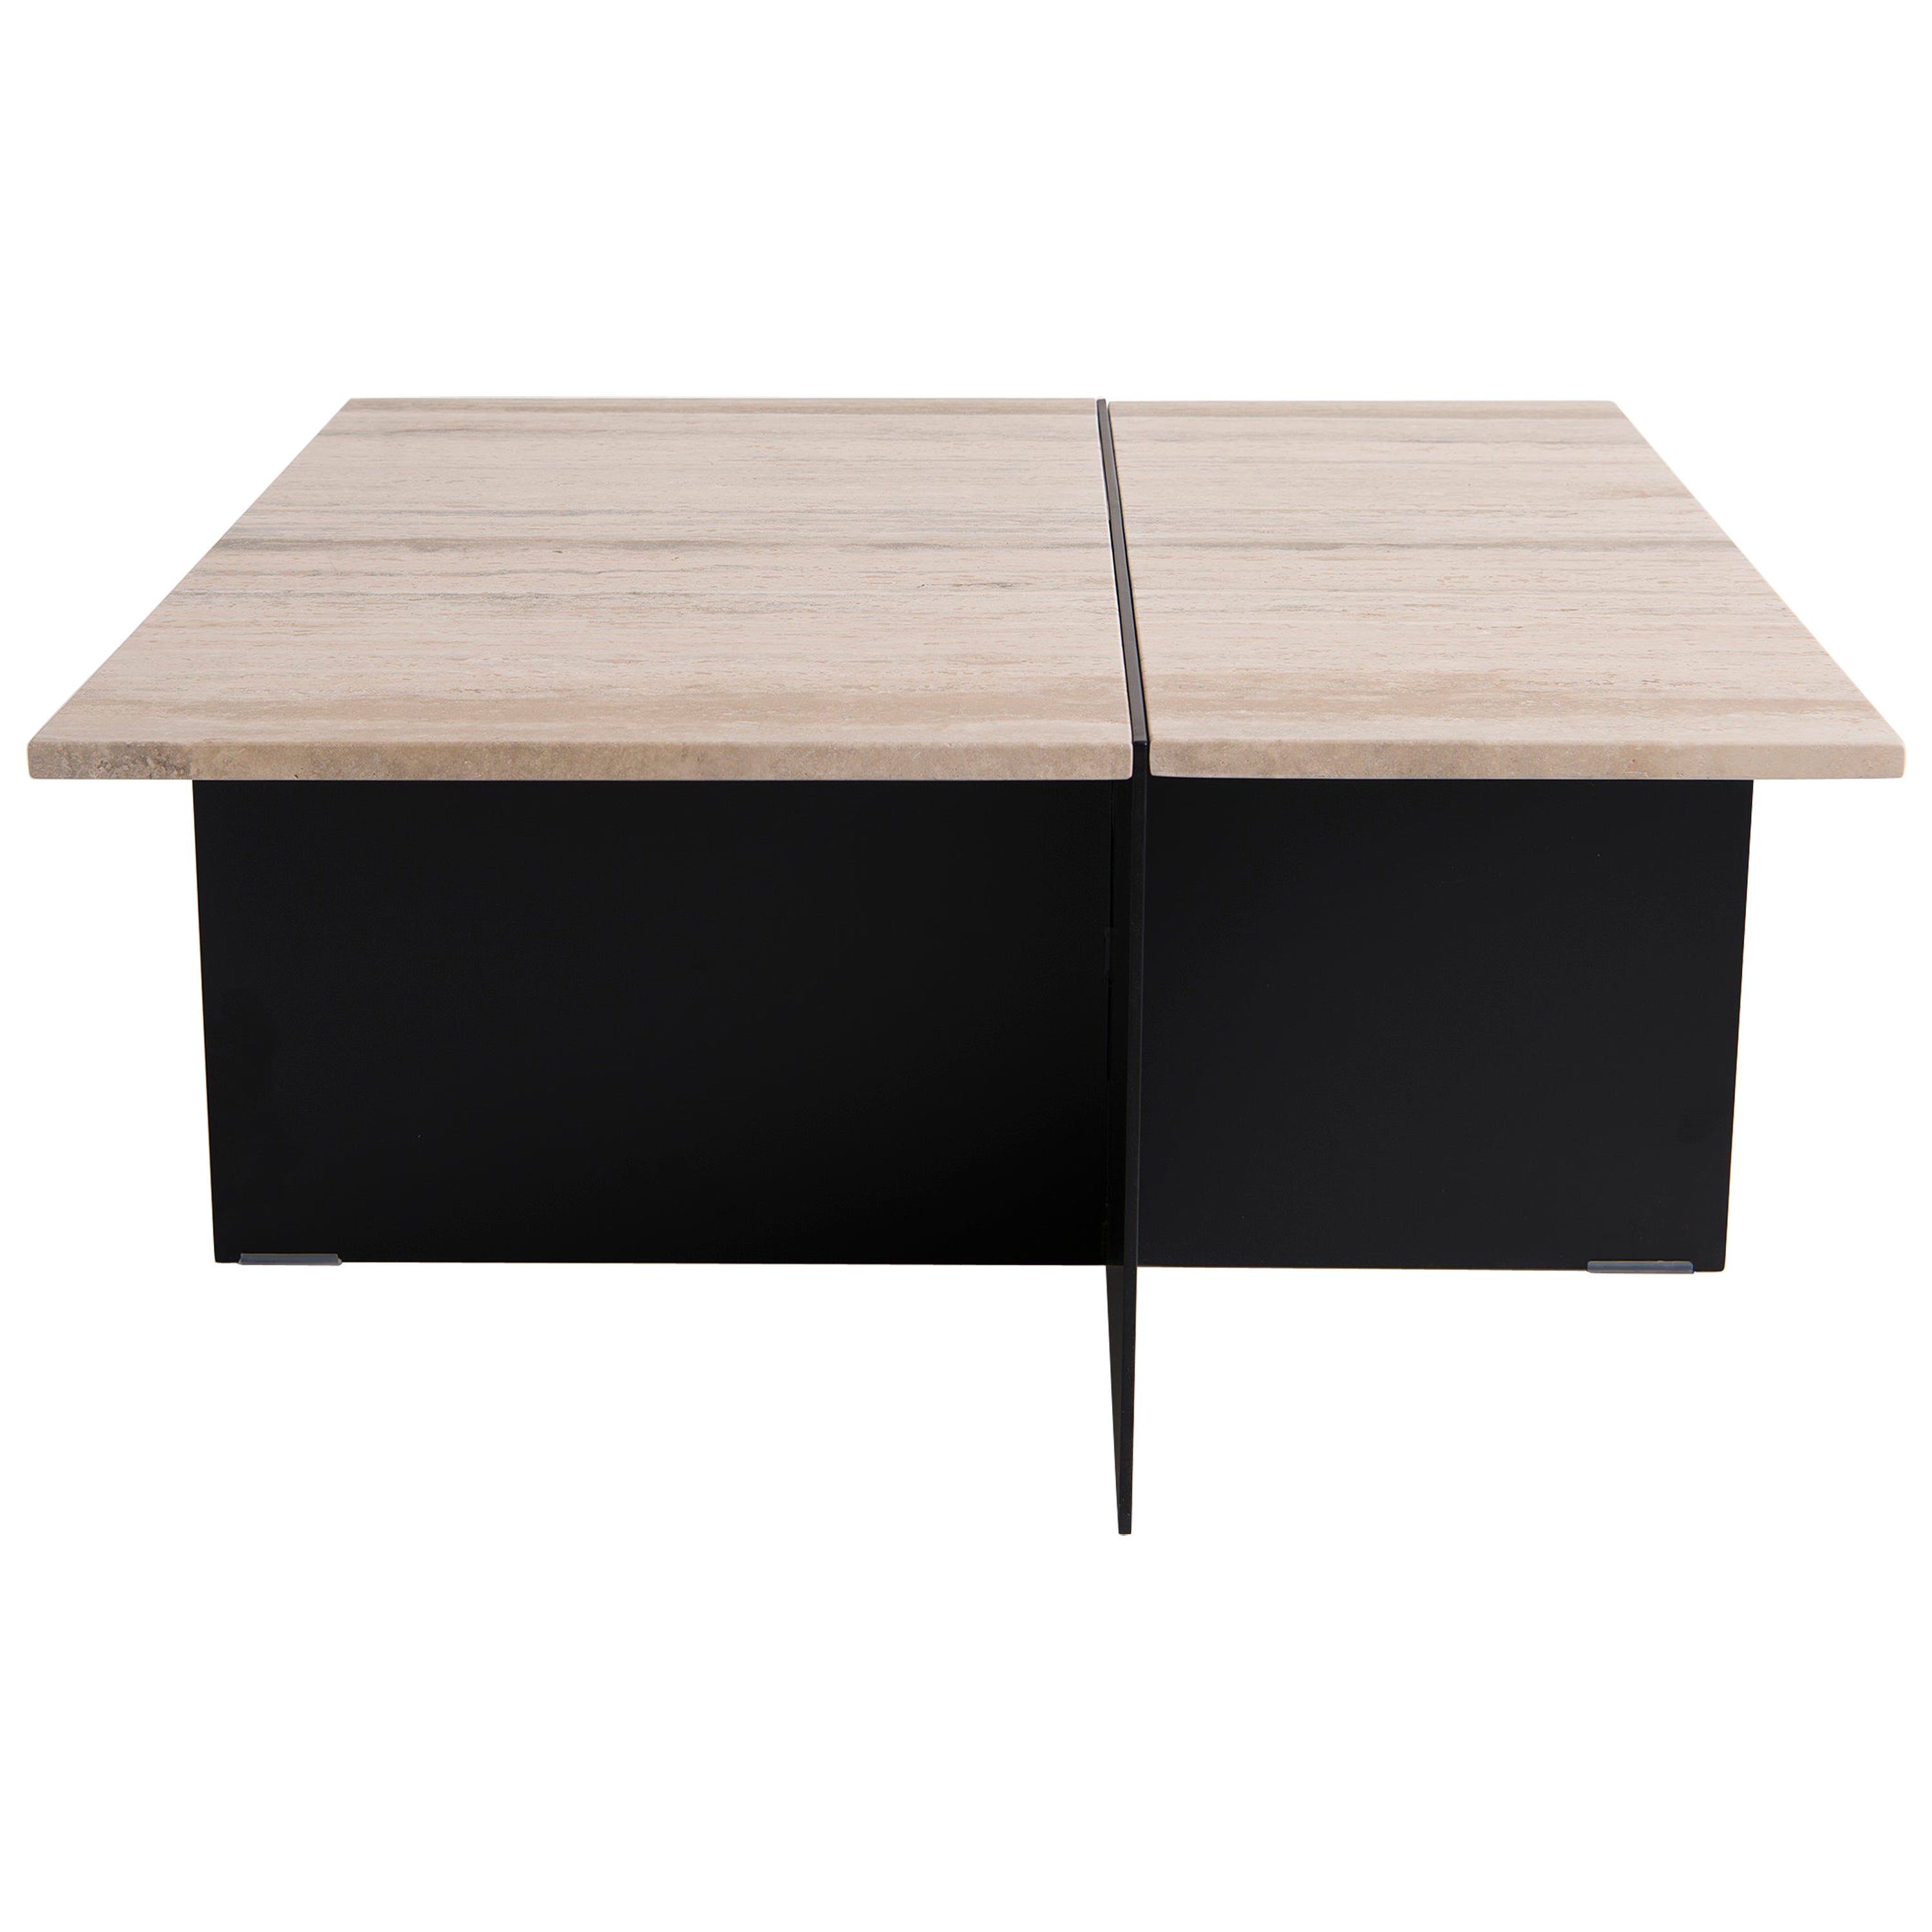 Division Square Coffee Table by Phase Design For Sale